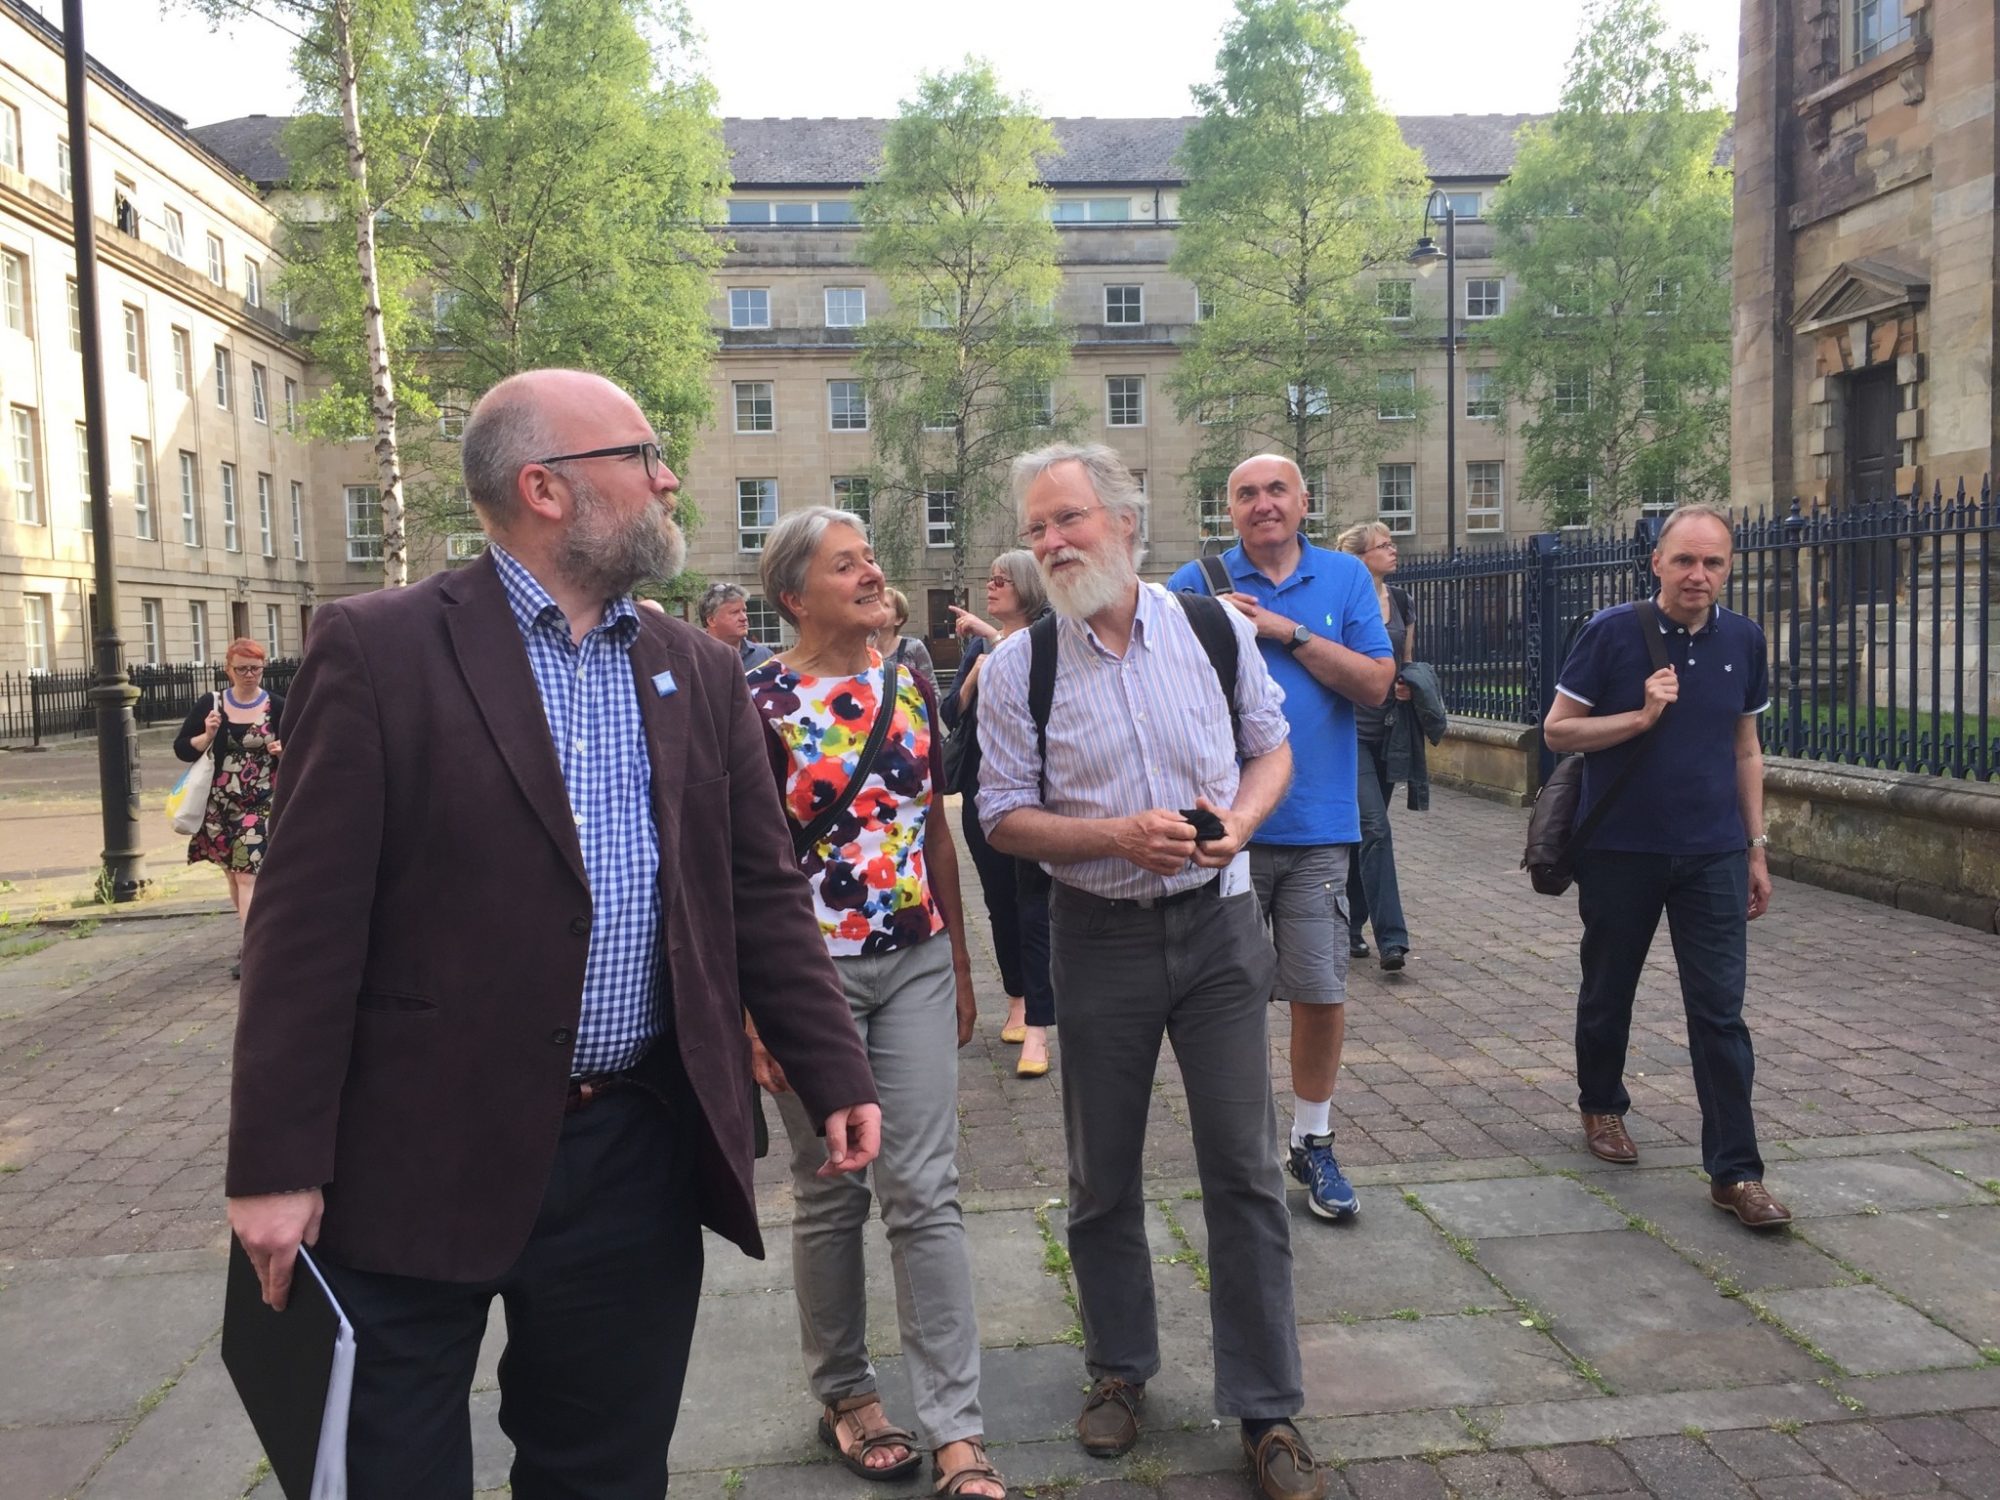 The Tenement Renaissance City – the New Gorbals and Laurieston

Our walking tours are taken by GCHT Building Grants Officer, Niall Murphy who is a walking encyclopaedia of knowledge!